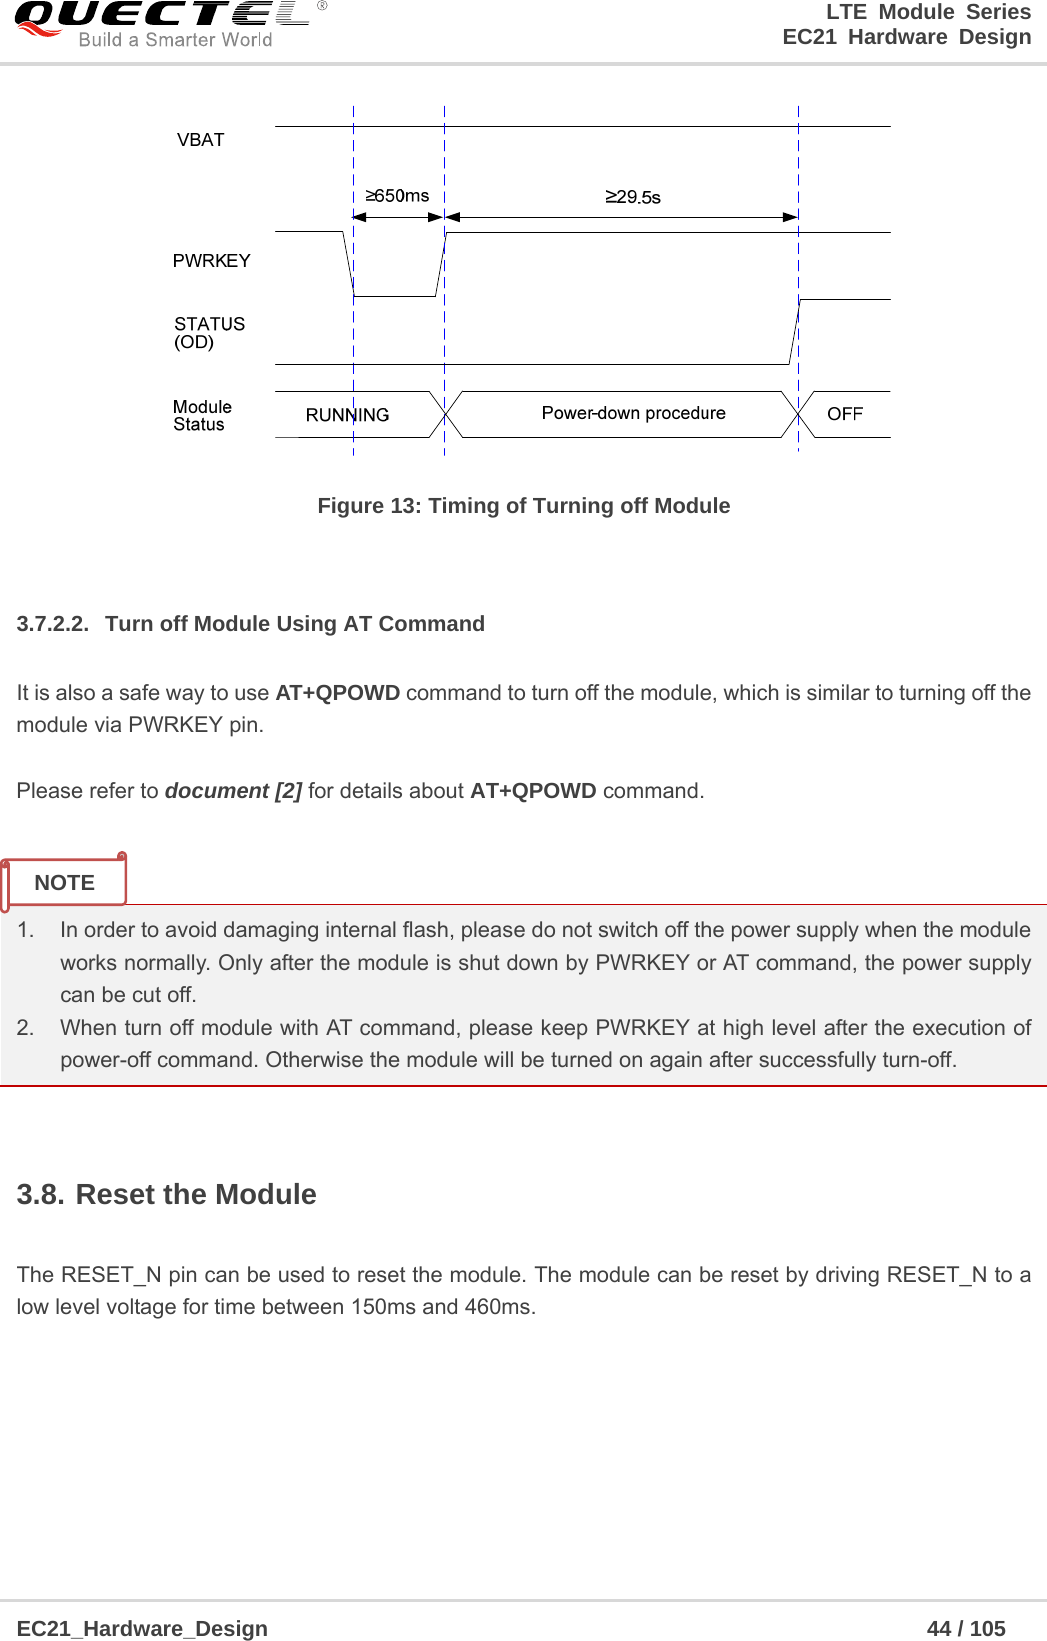                                                                        LTE Module Series                                                                 EC21 Hardware Design  EC21_Hardware_Design                                                            44 / 105     Figure 13: Timing of Turning off Module  3.7.2.2.  Turn off Module Using AT Command It is also a safe way to use AT+QPOWD command to turn off the module, which is similar to turning off the module via PWRKEY pin.  Please refer to document [2] for details about AT+QPOWD command.   1.  In order to avoid damaging internal flash, please do not switch off the power supply when the module works normally. Only after the module is shut down by PWRKEY or AT command, the power supply can be cut off. 2.  When turn off module with AT command, please keep PWRKEY at high level after the execution of power-off command. Otherwise the module will be turned on again after successfully turn-off.  3.8. Reset the Module  The RESET_N pin can be used to reset the module. The module can be reset by driving RESET_N to a low level voltage for time between 150ms and 460ms.    NOTE 